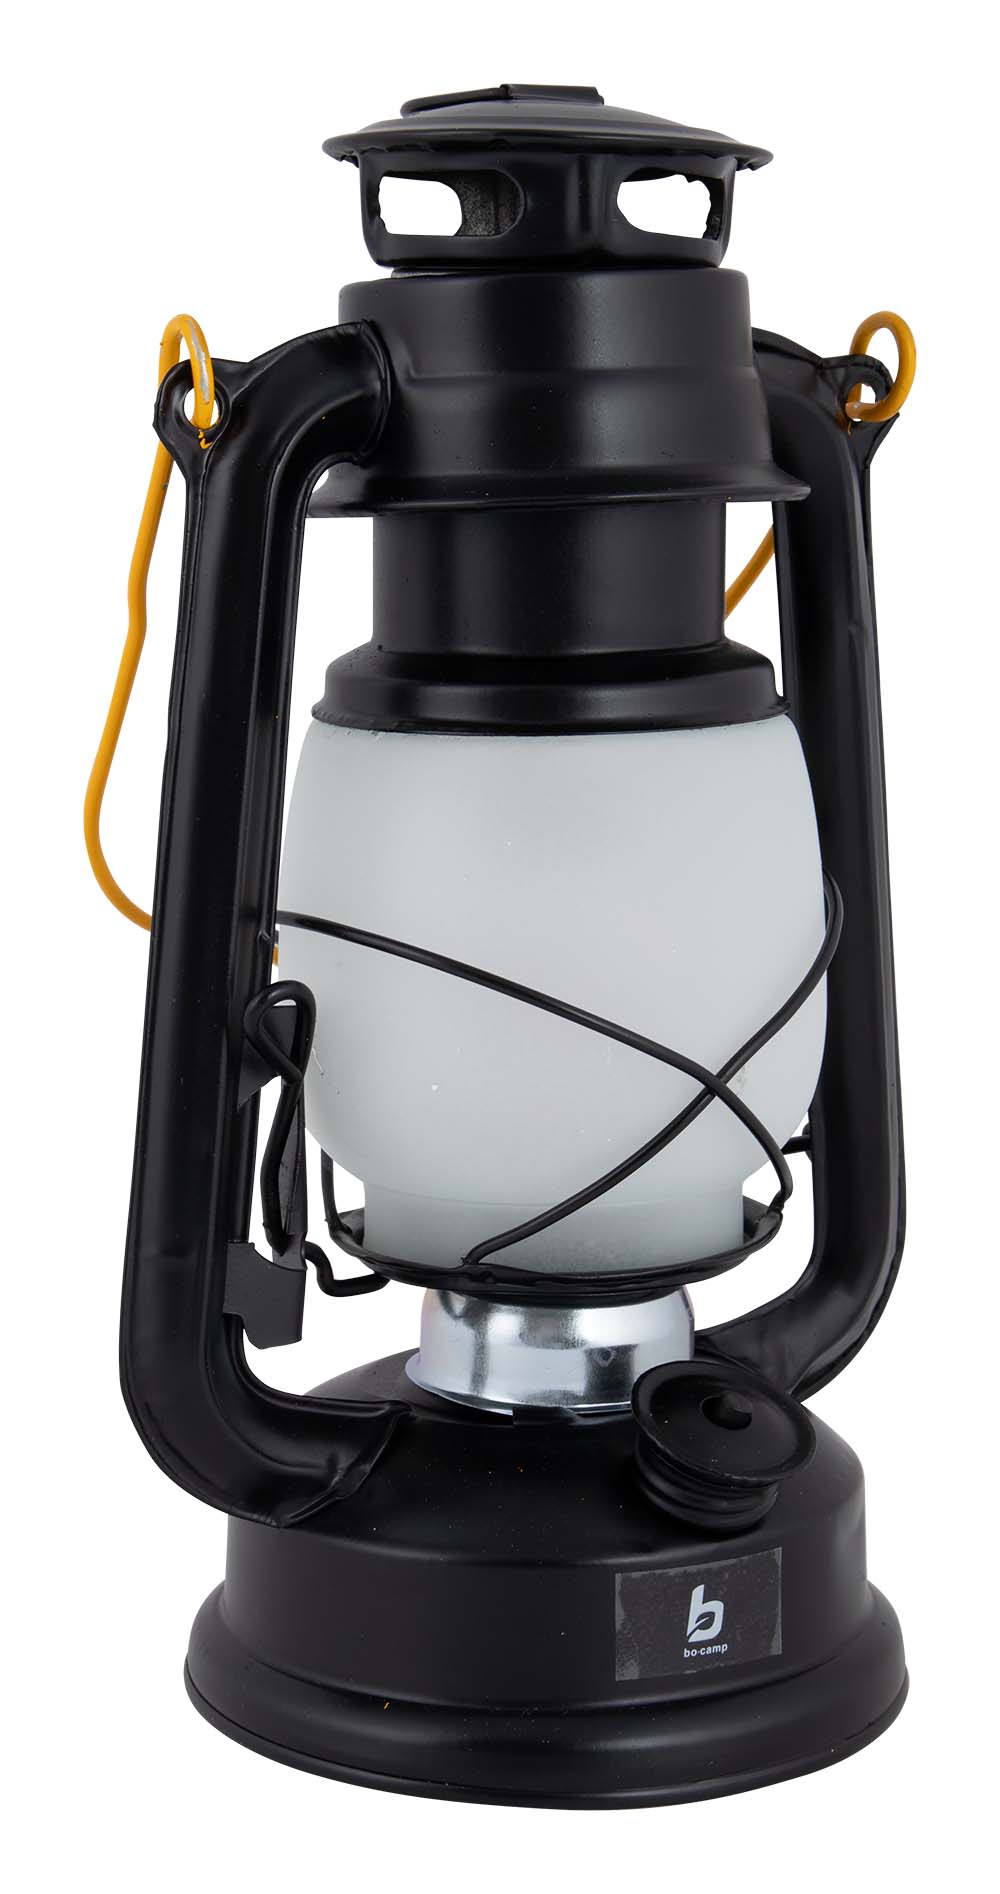 5818849 A classic LED storm lantern with an industrial look. With a handle, flame function and different light modes. The black steel gives the lantern a tough appearance. Because of the handle, the lantern can be used both standing and hanging. Operates on 2x AA batteries (not included).